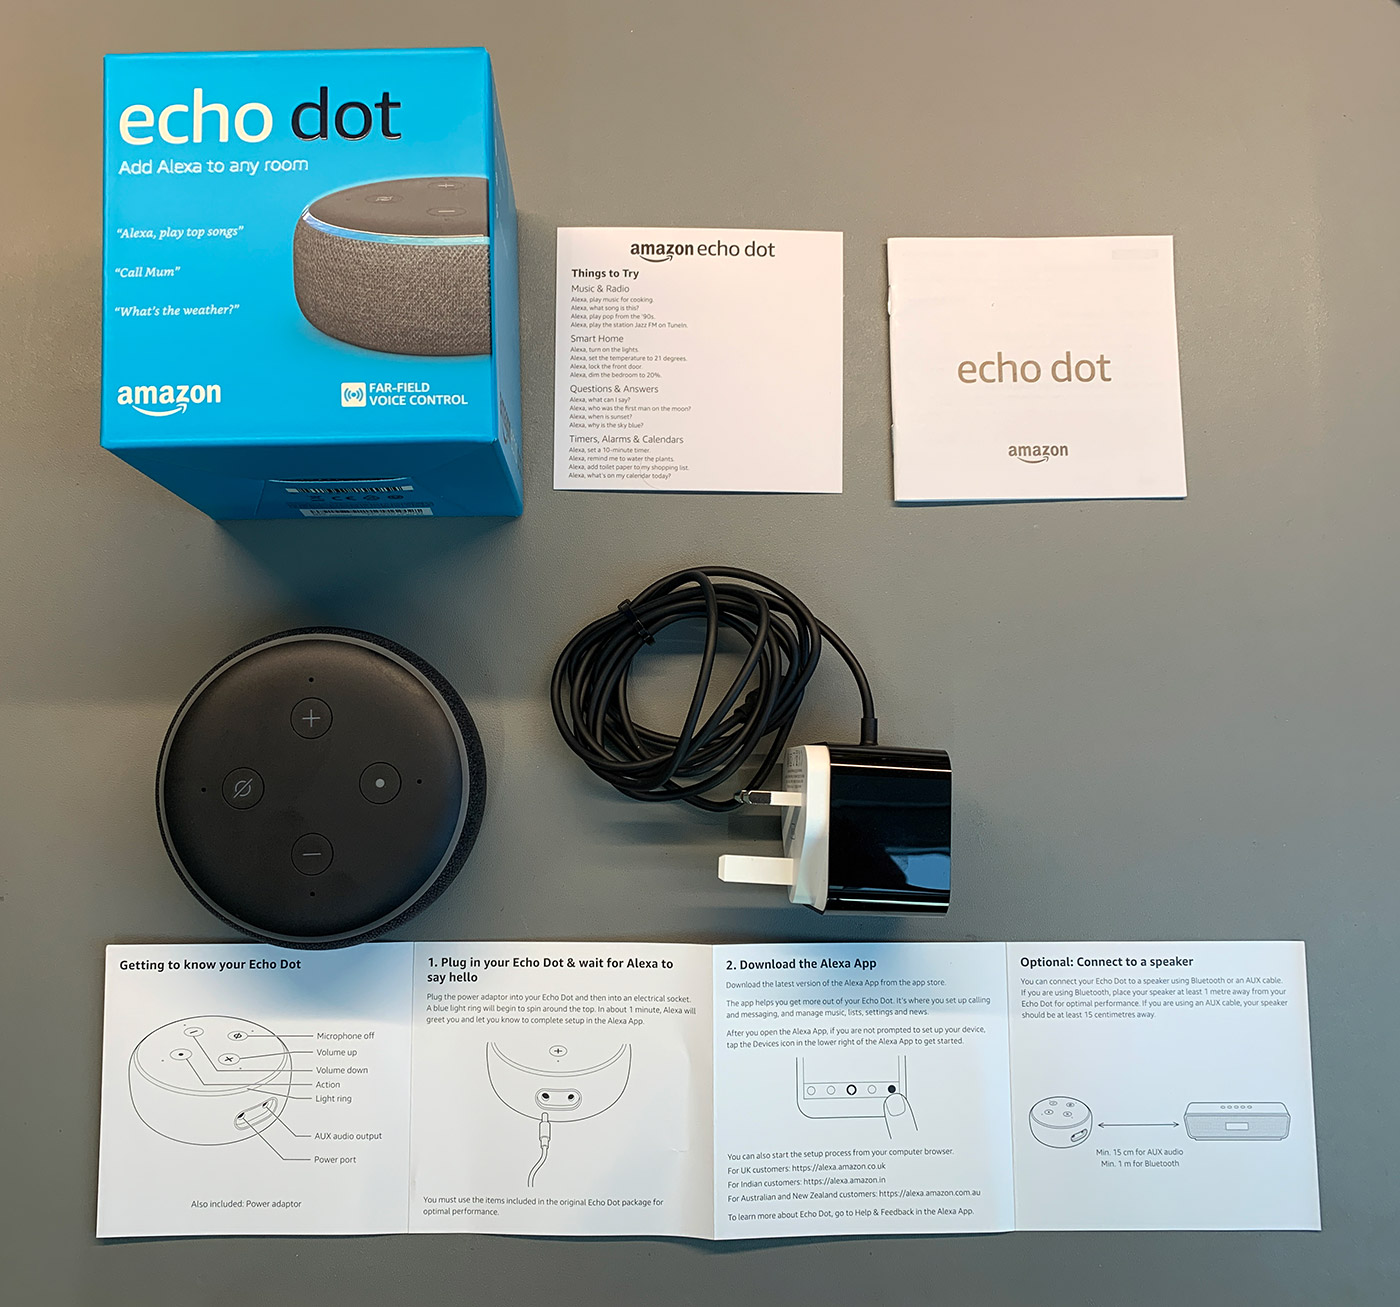 what can i do with my echo spot